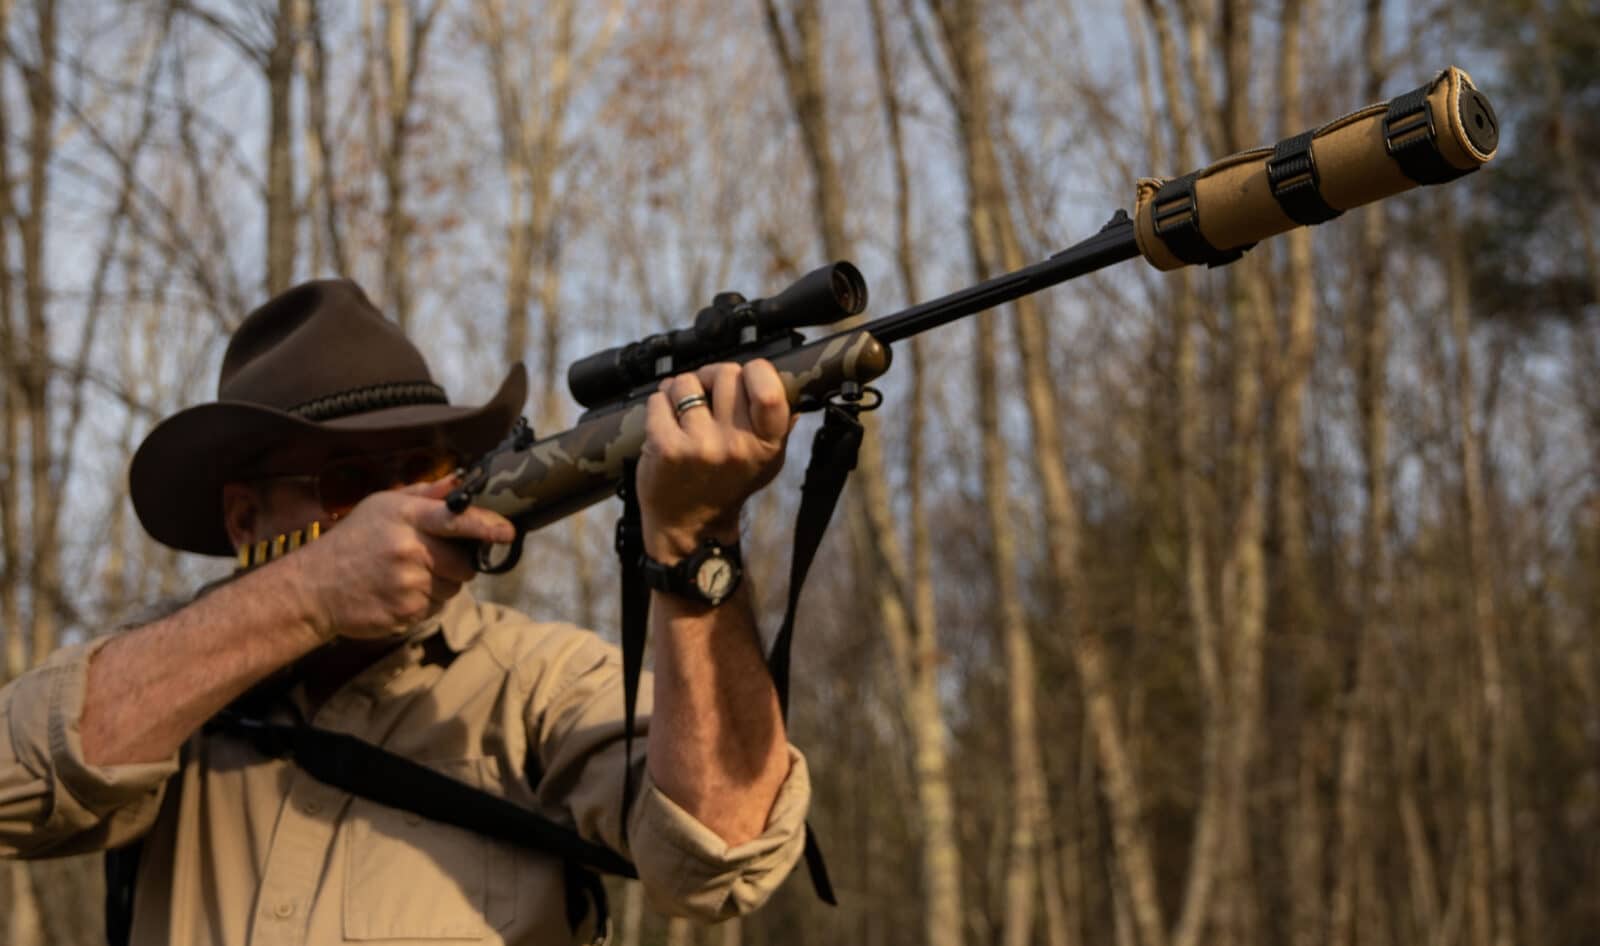 hunting with a firearm suppressor